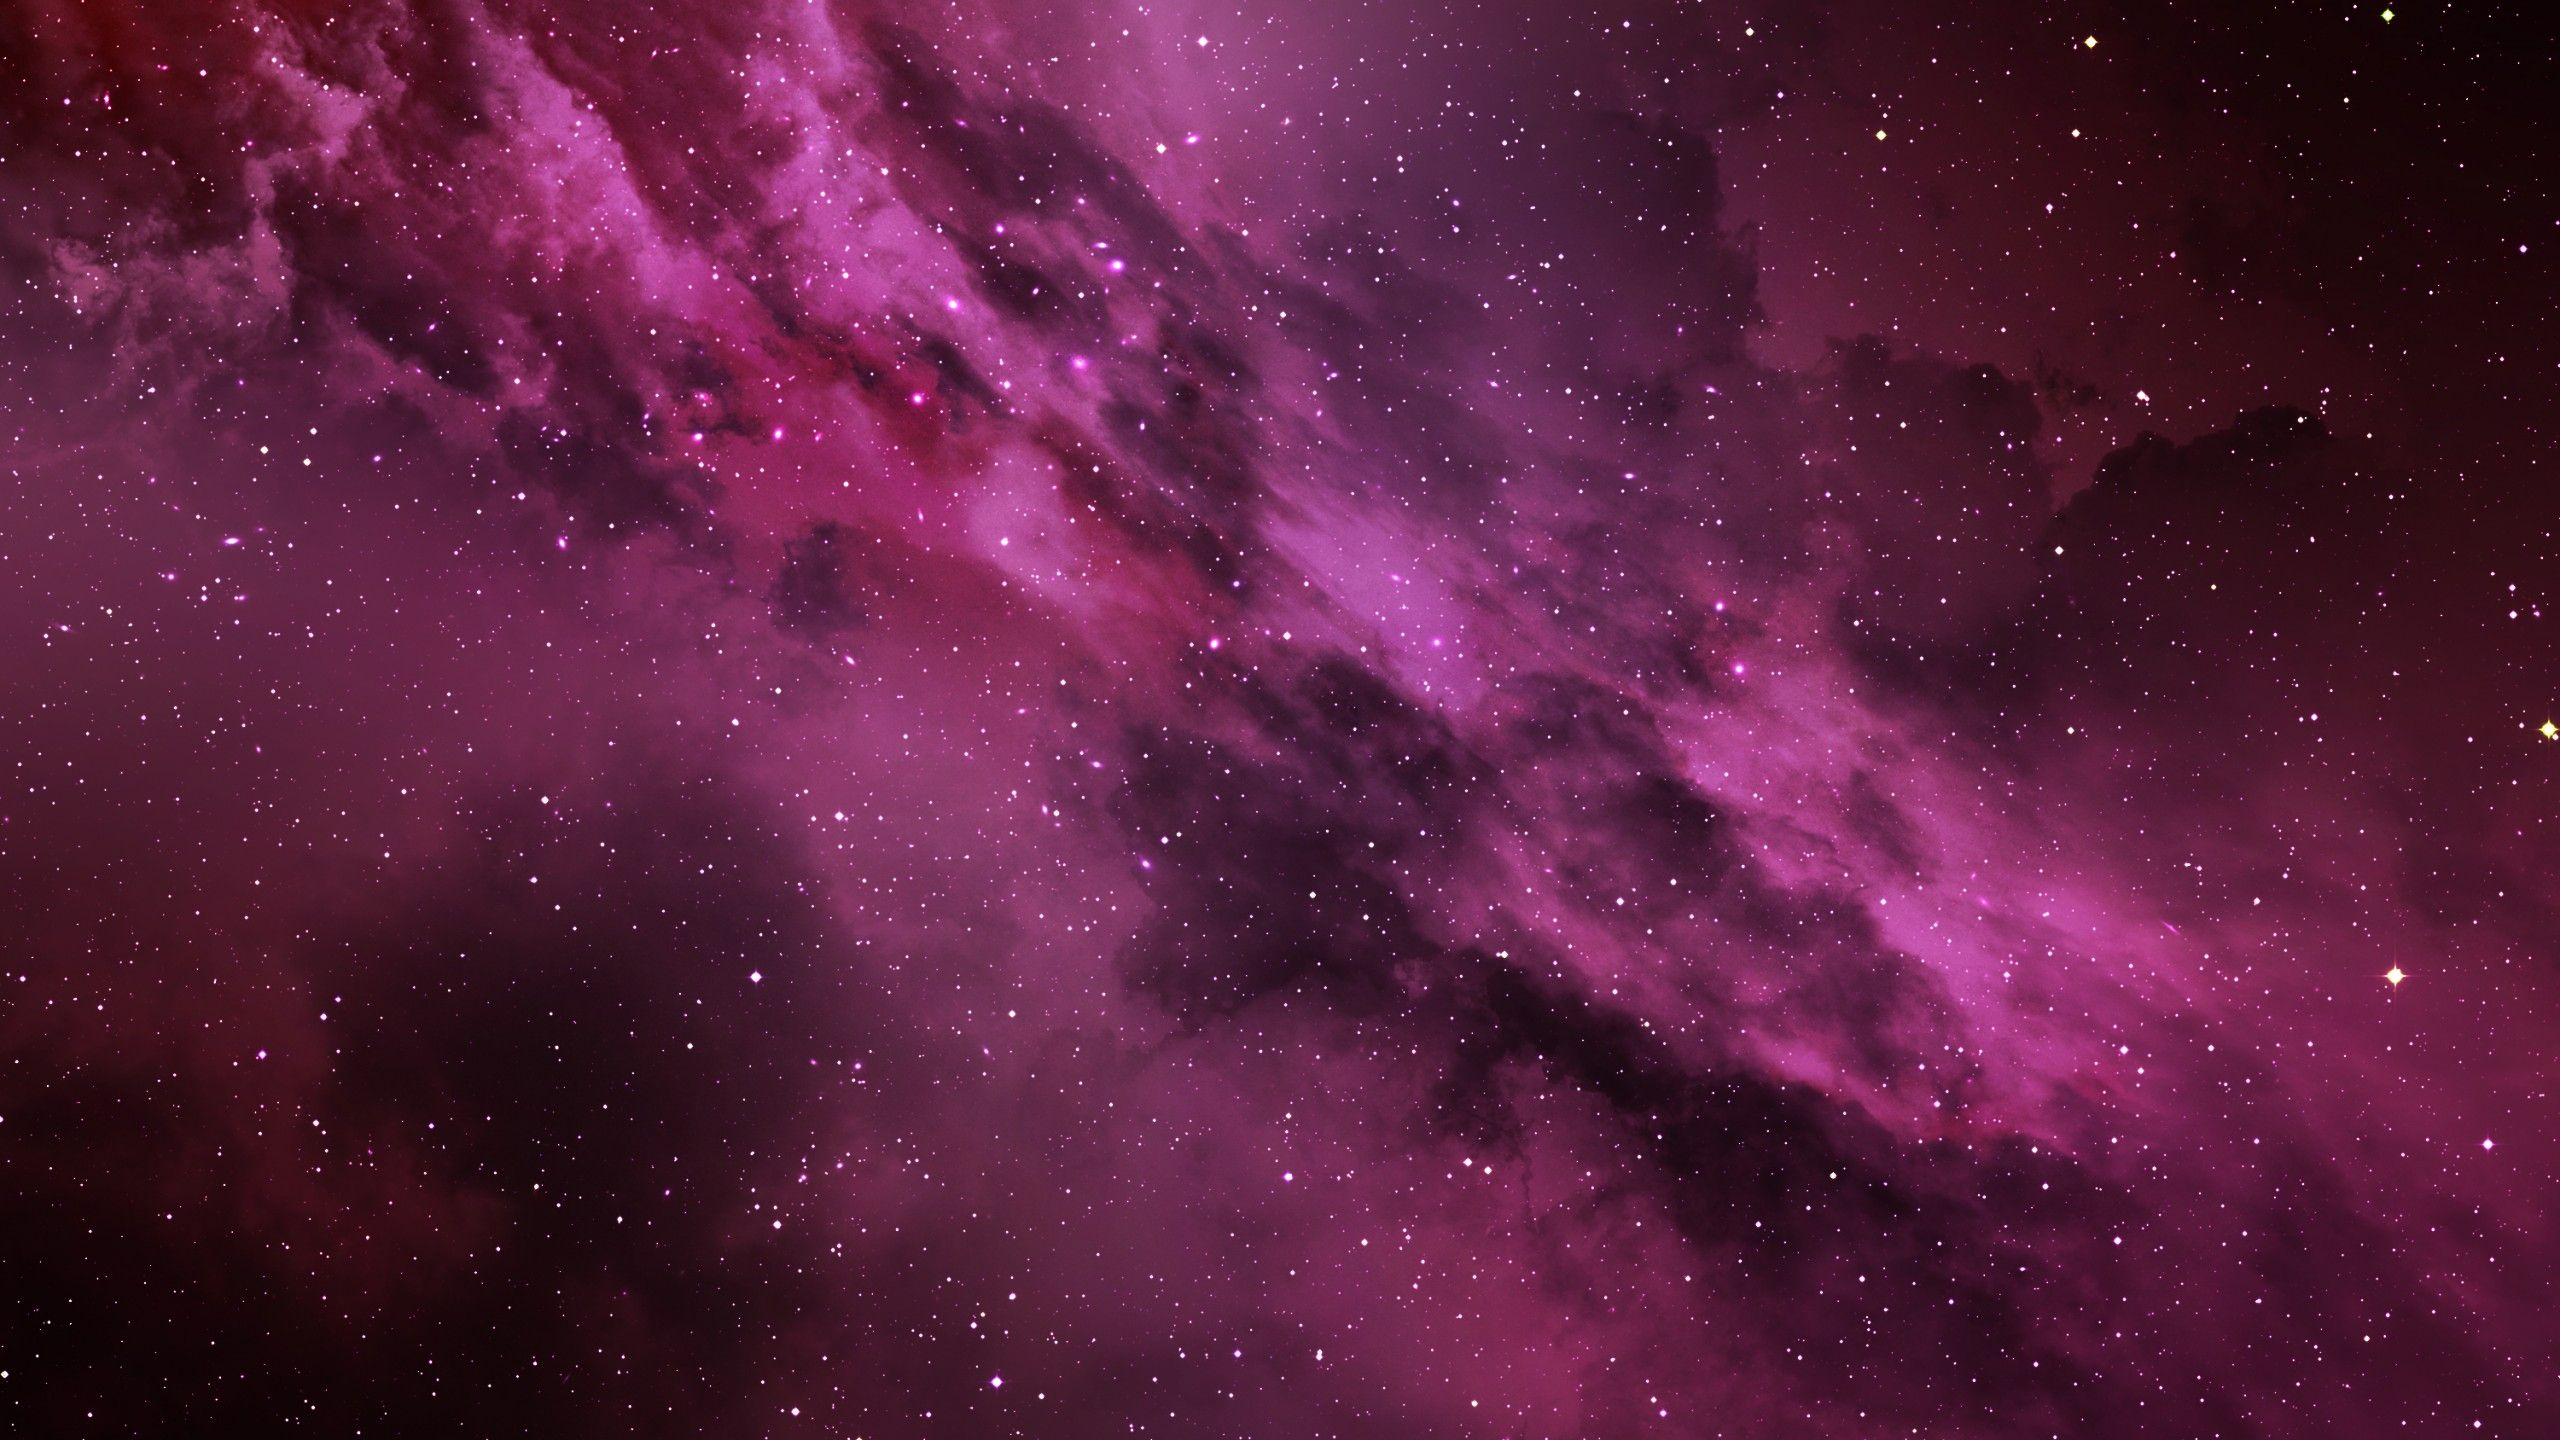 Galaxy Background Images HD Pictures and Wallpaper For Free Download   Pngtree